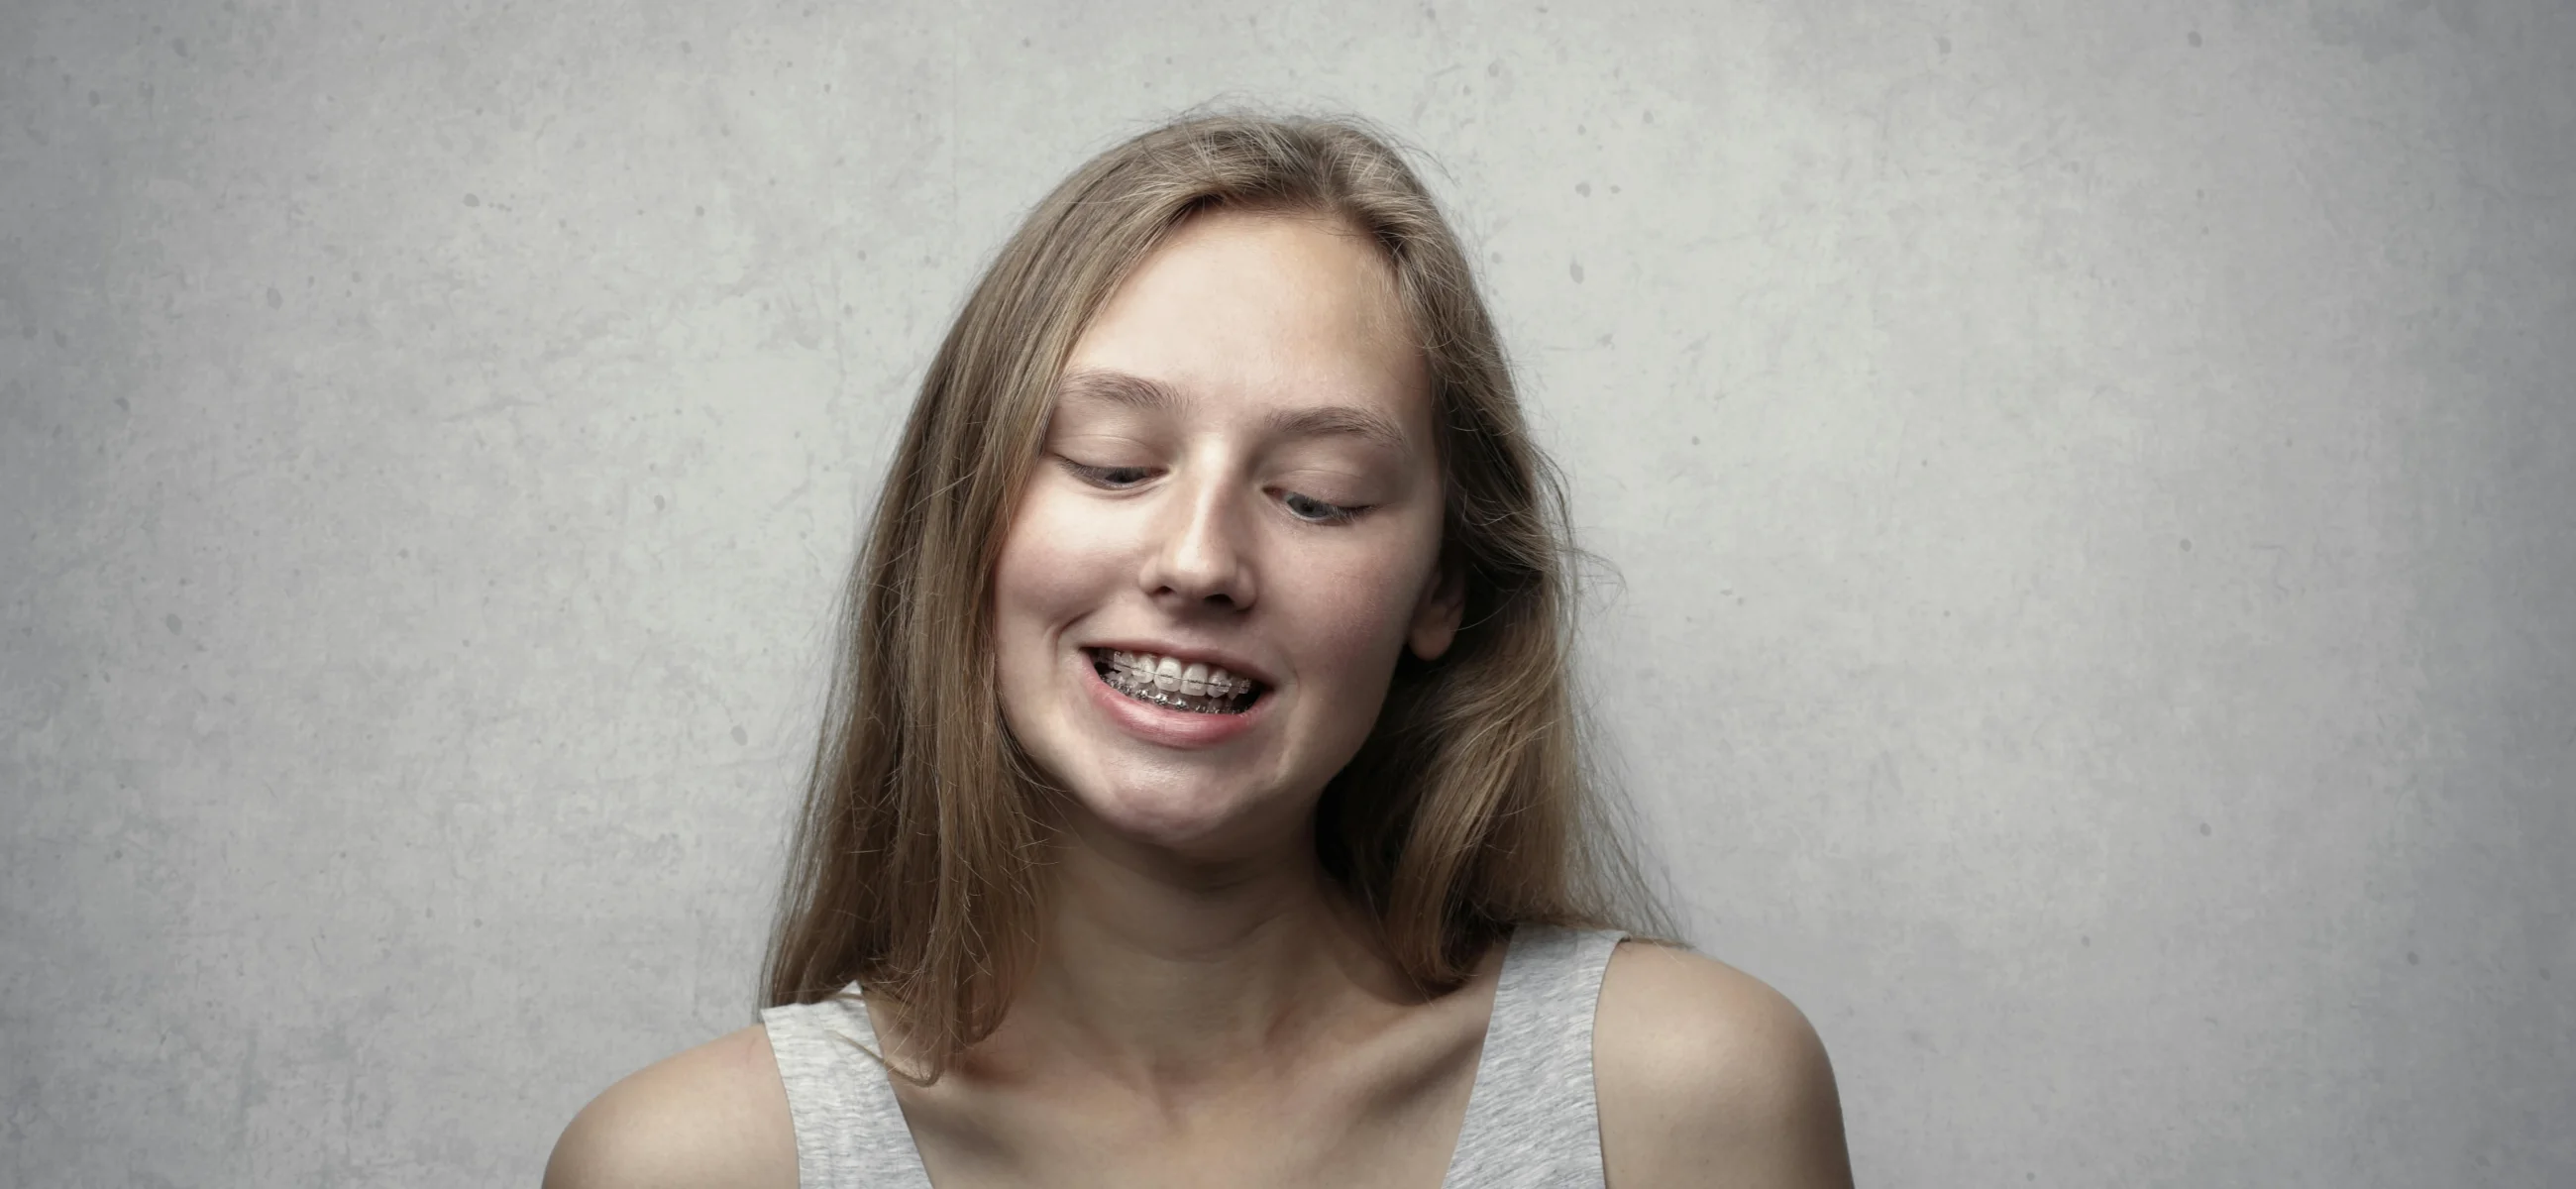 Everything about getting braces as an adult: Is it good?